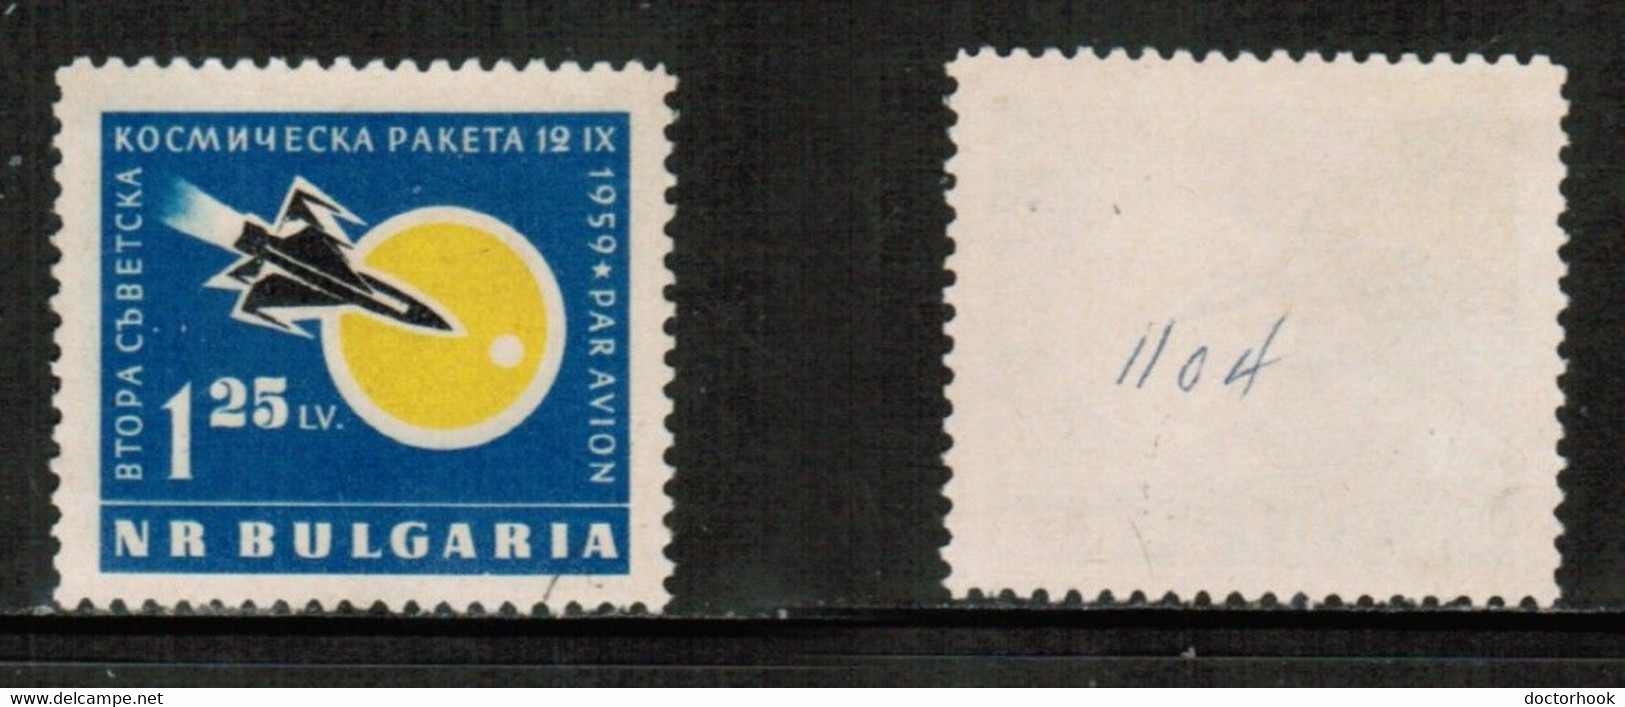 BULGARIA   Scott # C 79 USED (CONDITION AS PER SCAN) (Stamp Scan # 878-6) - Airmail